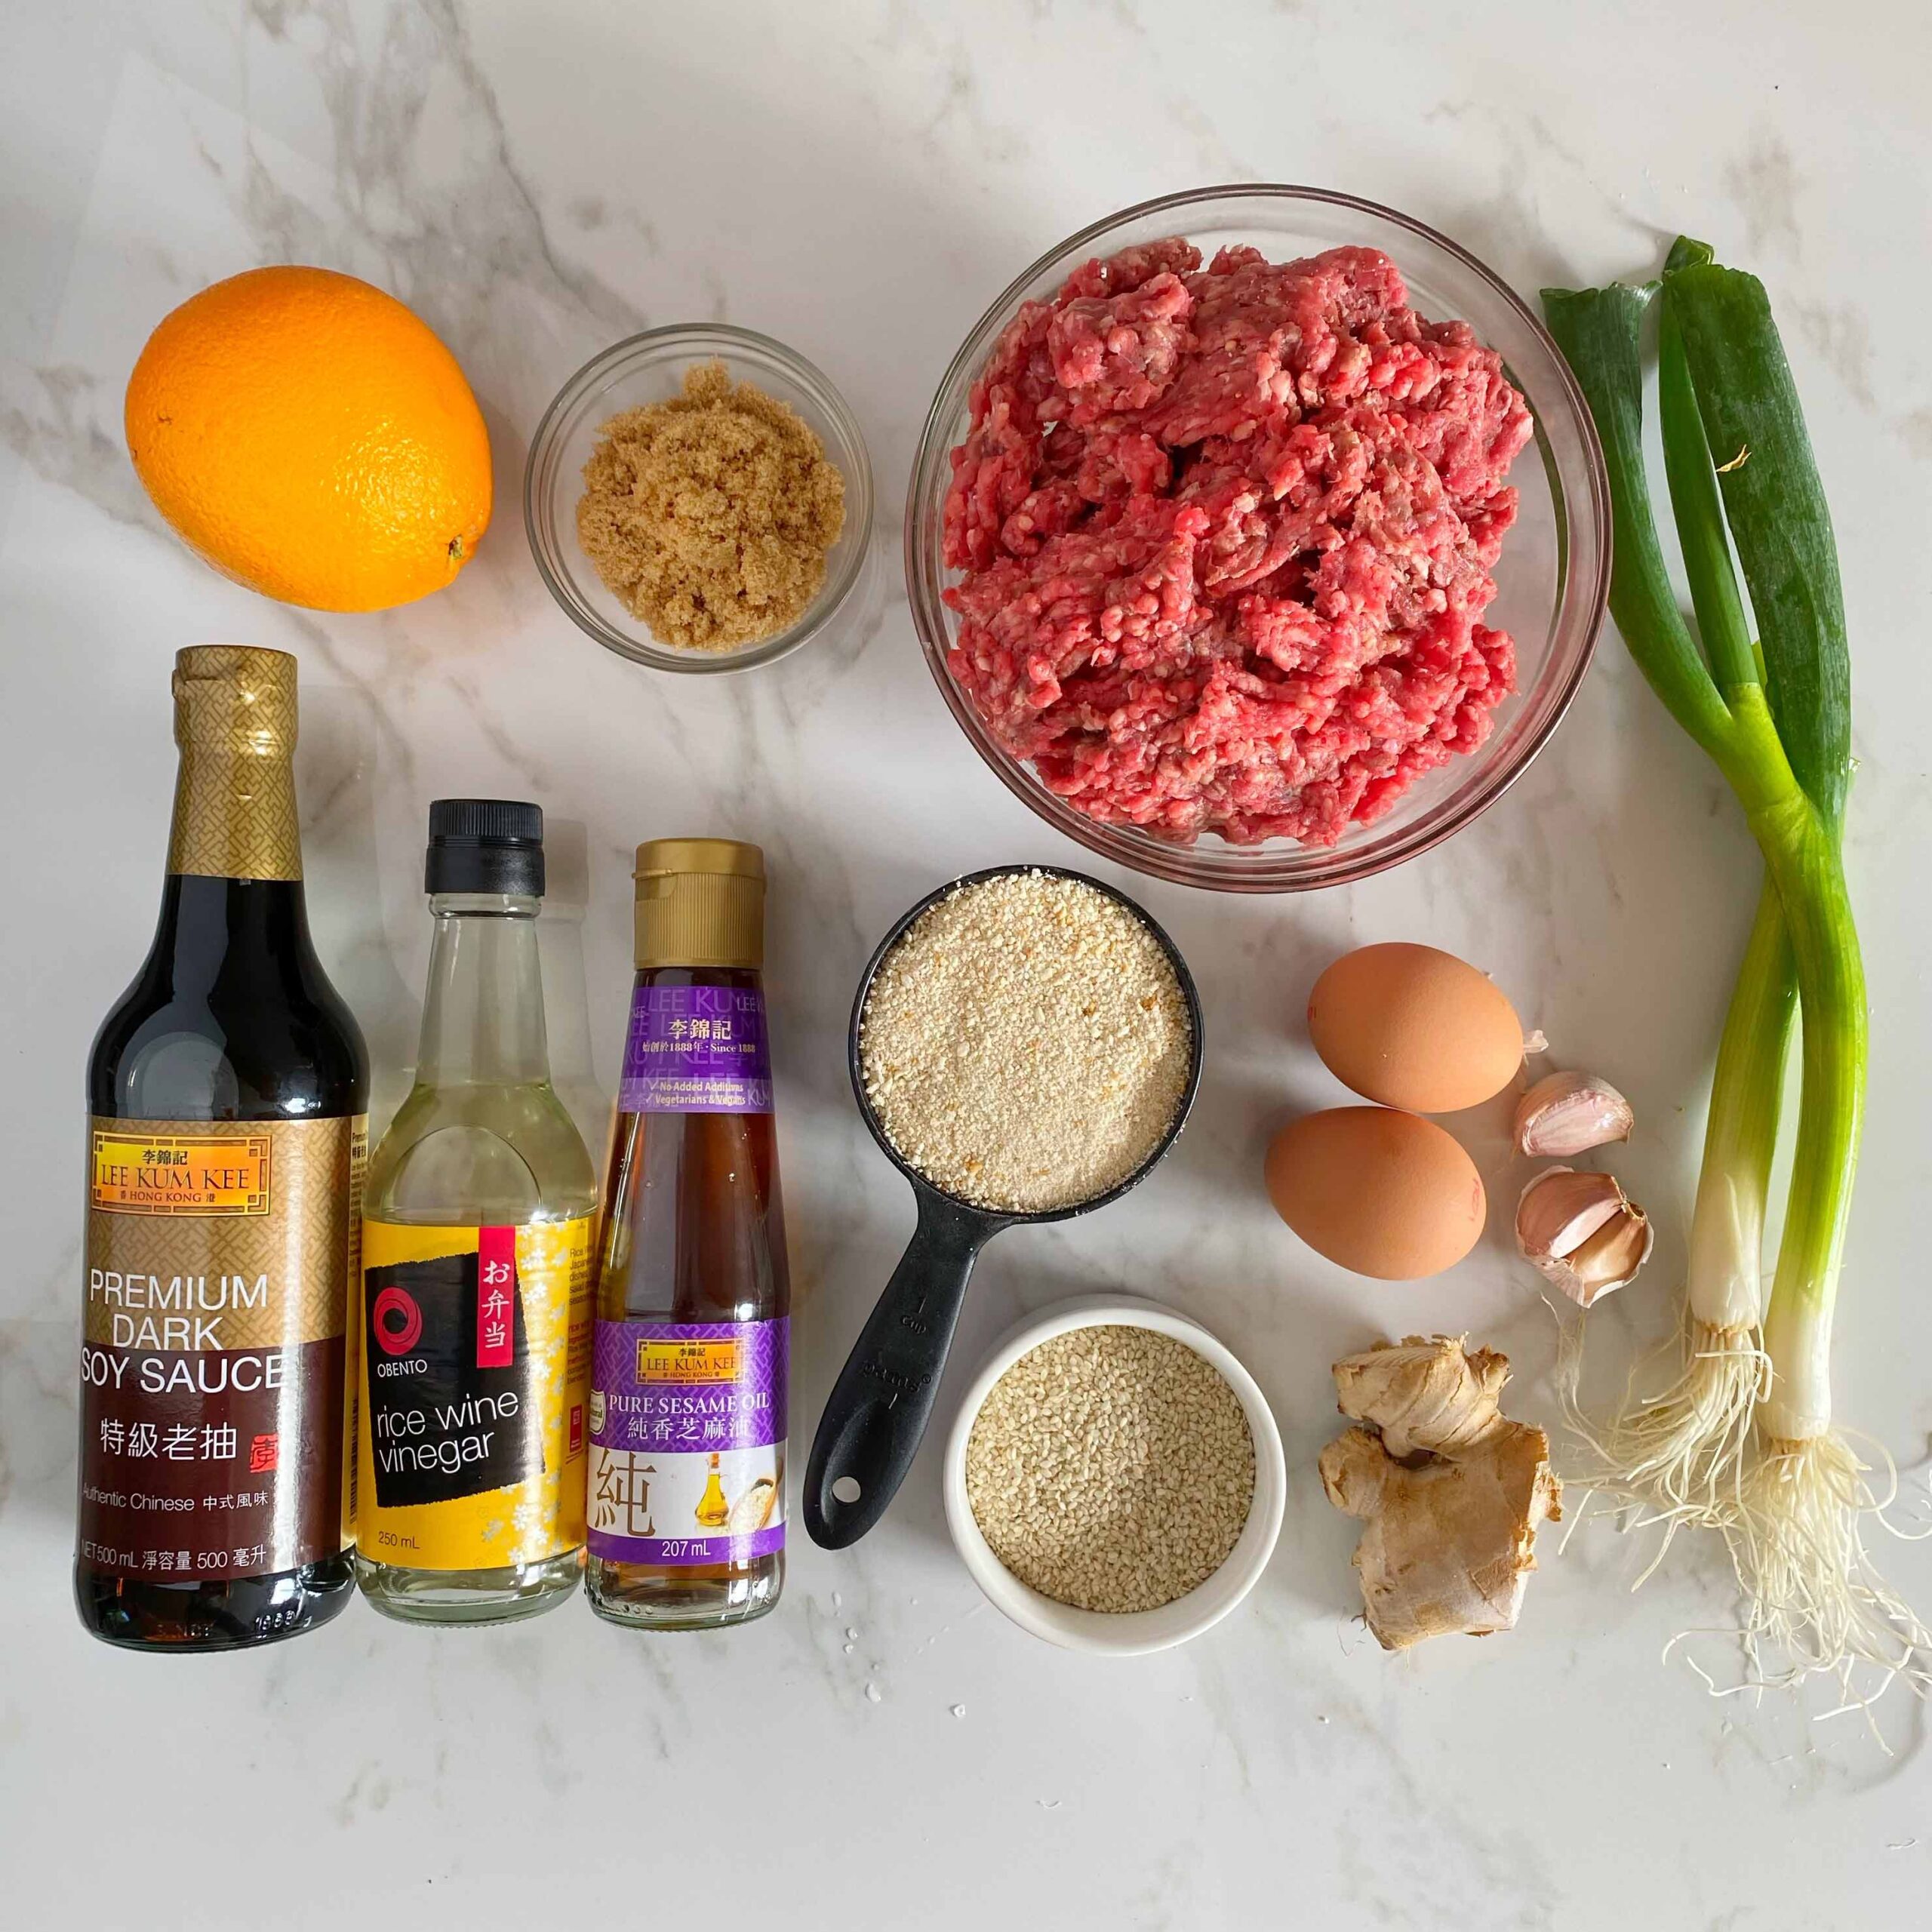 The ingredients for Sticky Asian Meatballs on a white bench.